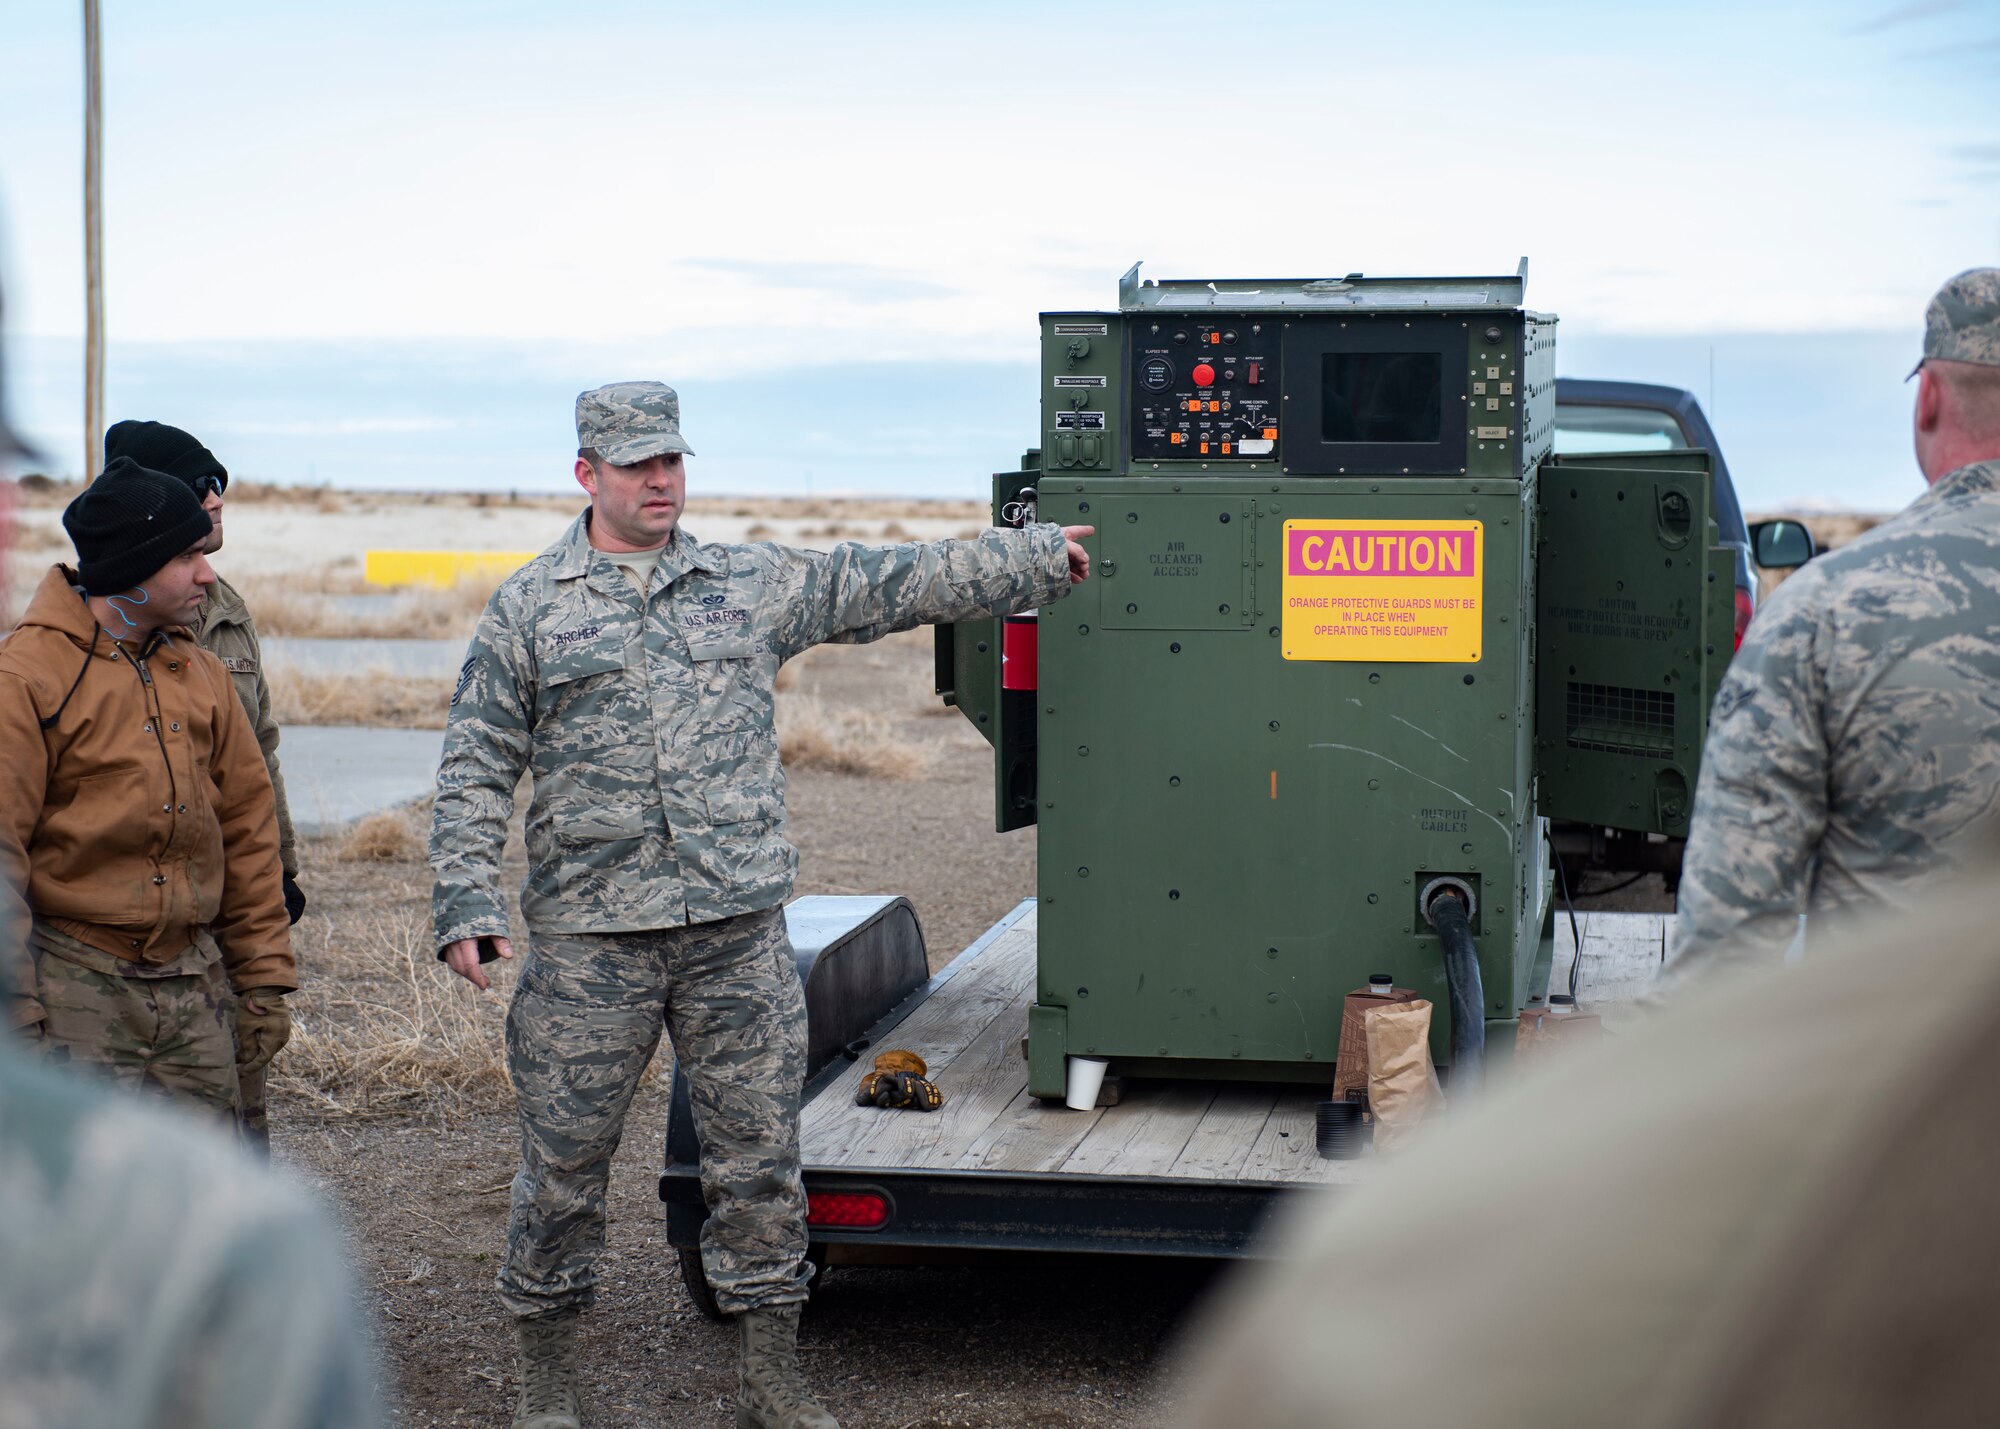 Tech. Sgt. Christopher Archer, 366th Civil Engineer Squadron electrical power production craftsman, teaches Airmen how to use a power generator during a multi-capable Airman training, Jan. 23, 2020, at Mountain Home Air Force Base, Idaho. This training was conducted to equip Airman with skills from other career fields to enhance their readiness. (U.S. Air Force photo by Senior Airman Tyrell Hall)